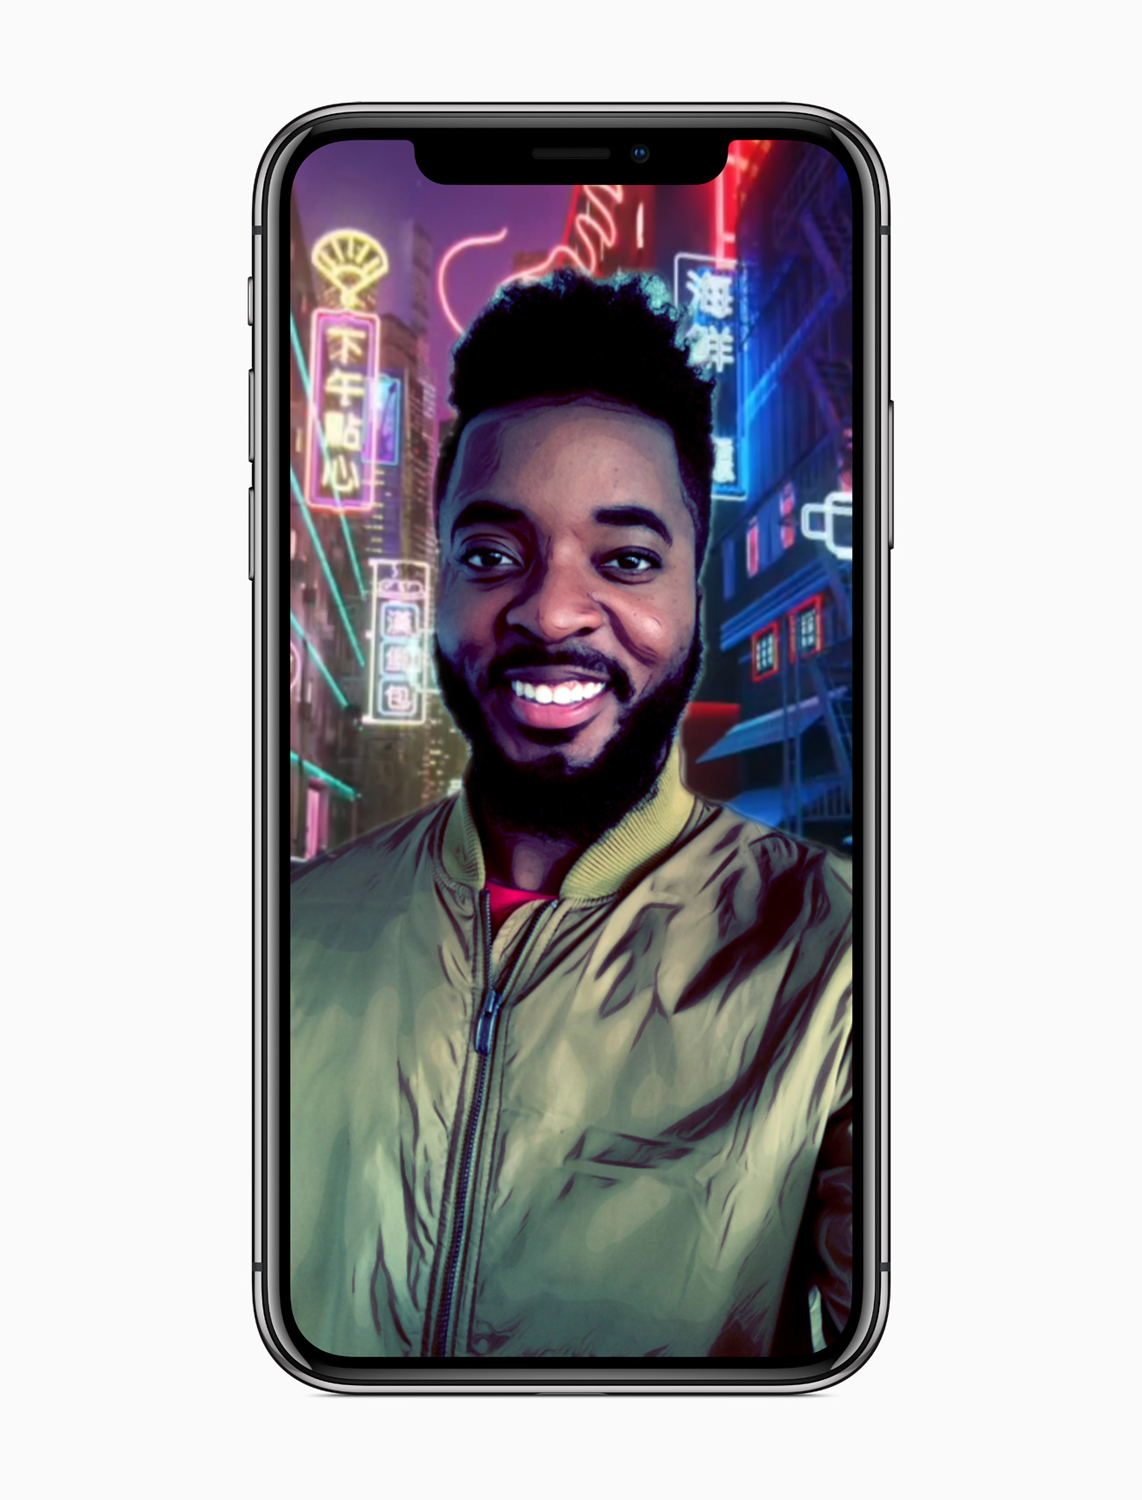 iPhone_X_posterized_neon_filter_screen_20171109